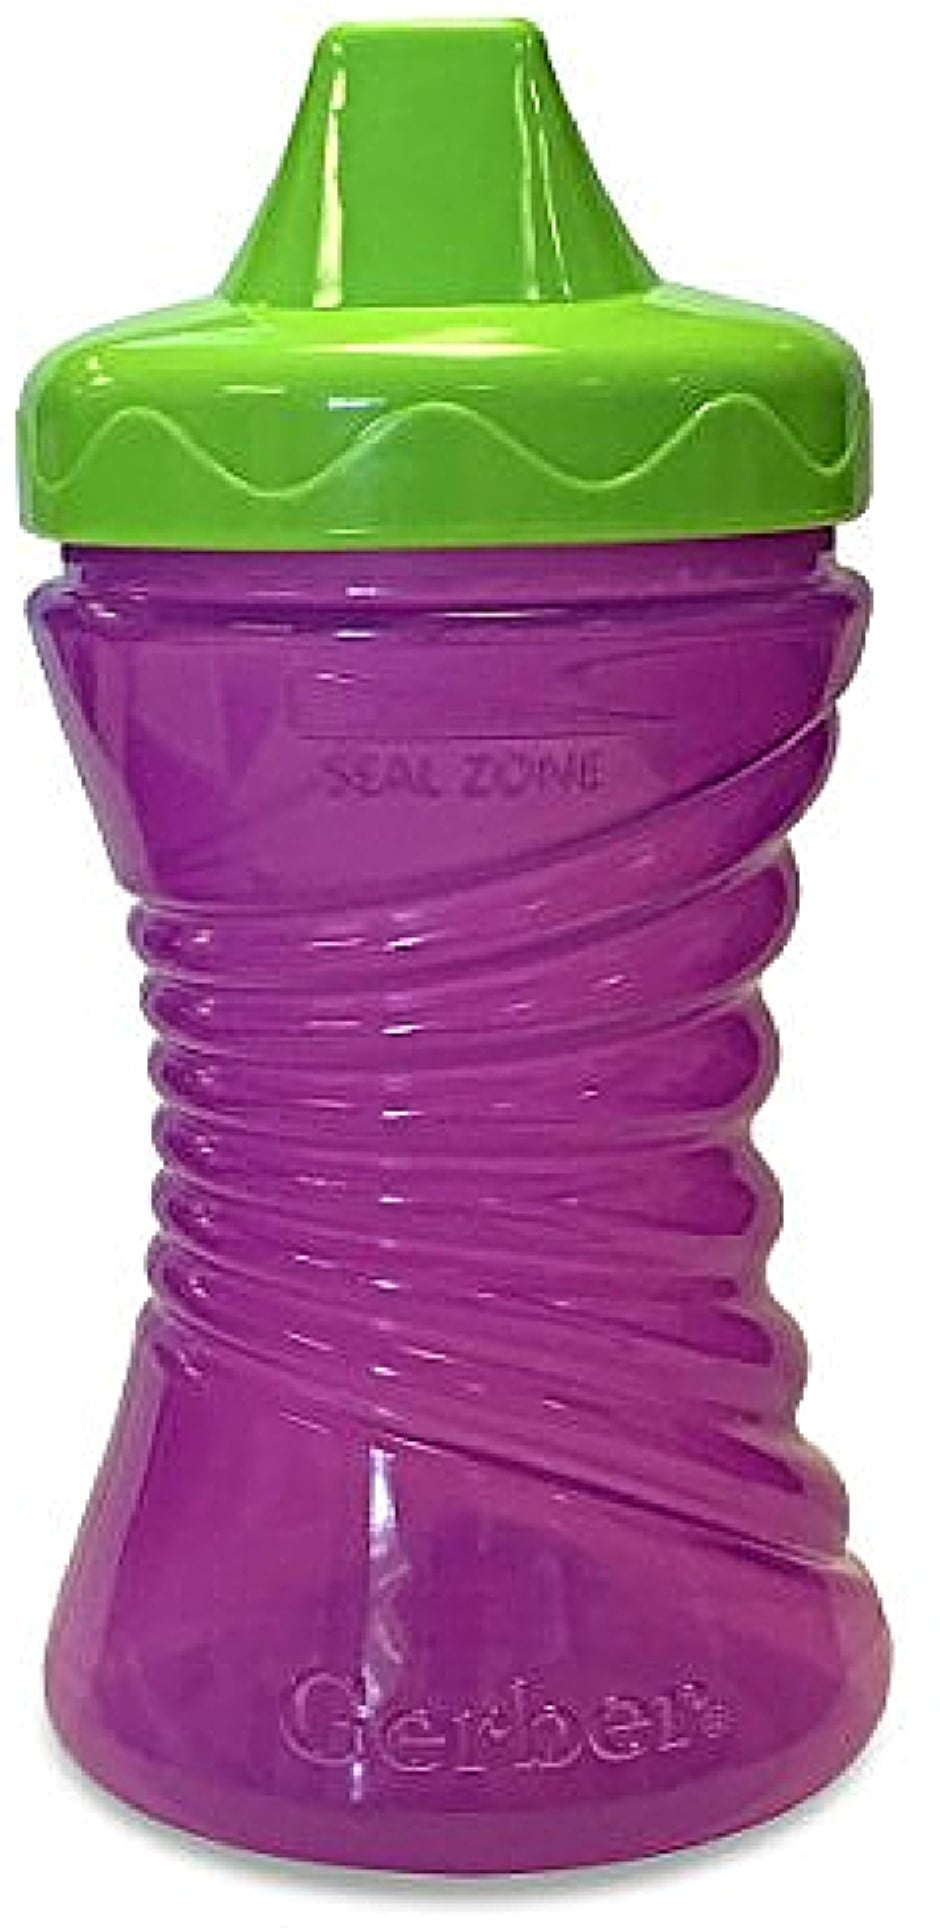 Colors May Vary 2 ea 4 pack Gerber Graduates Fun Grips 12m Spill-Proof Cups 